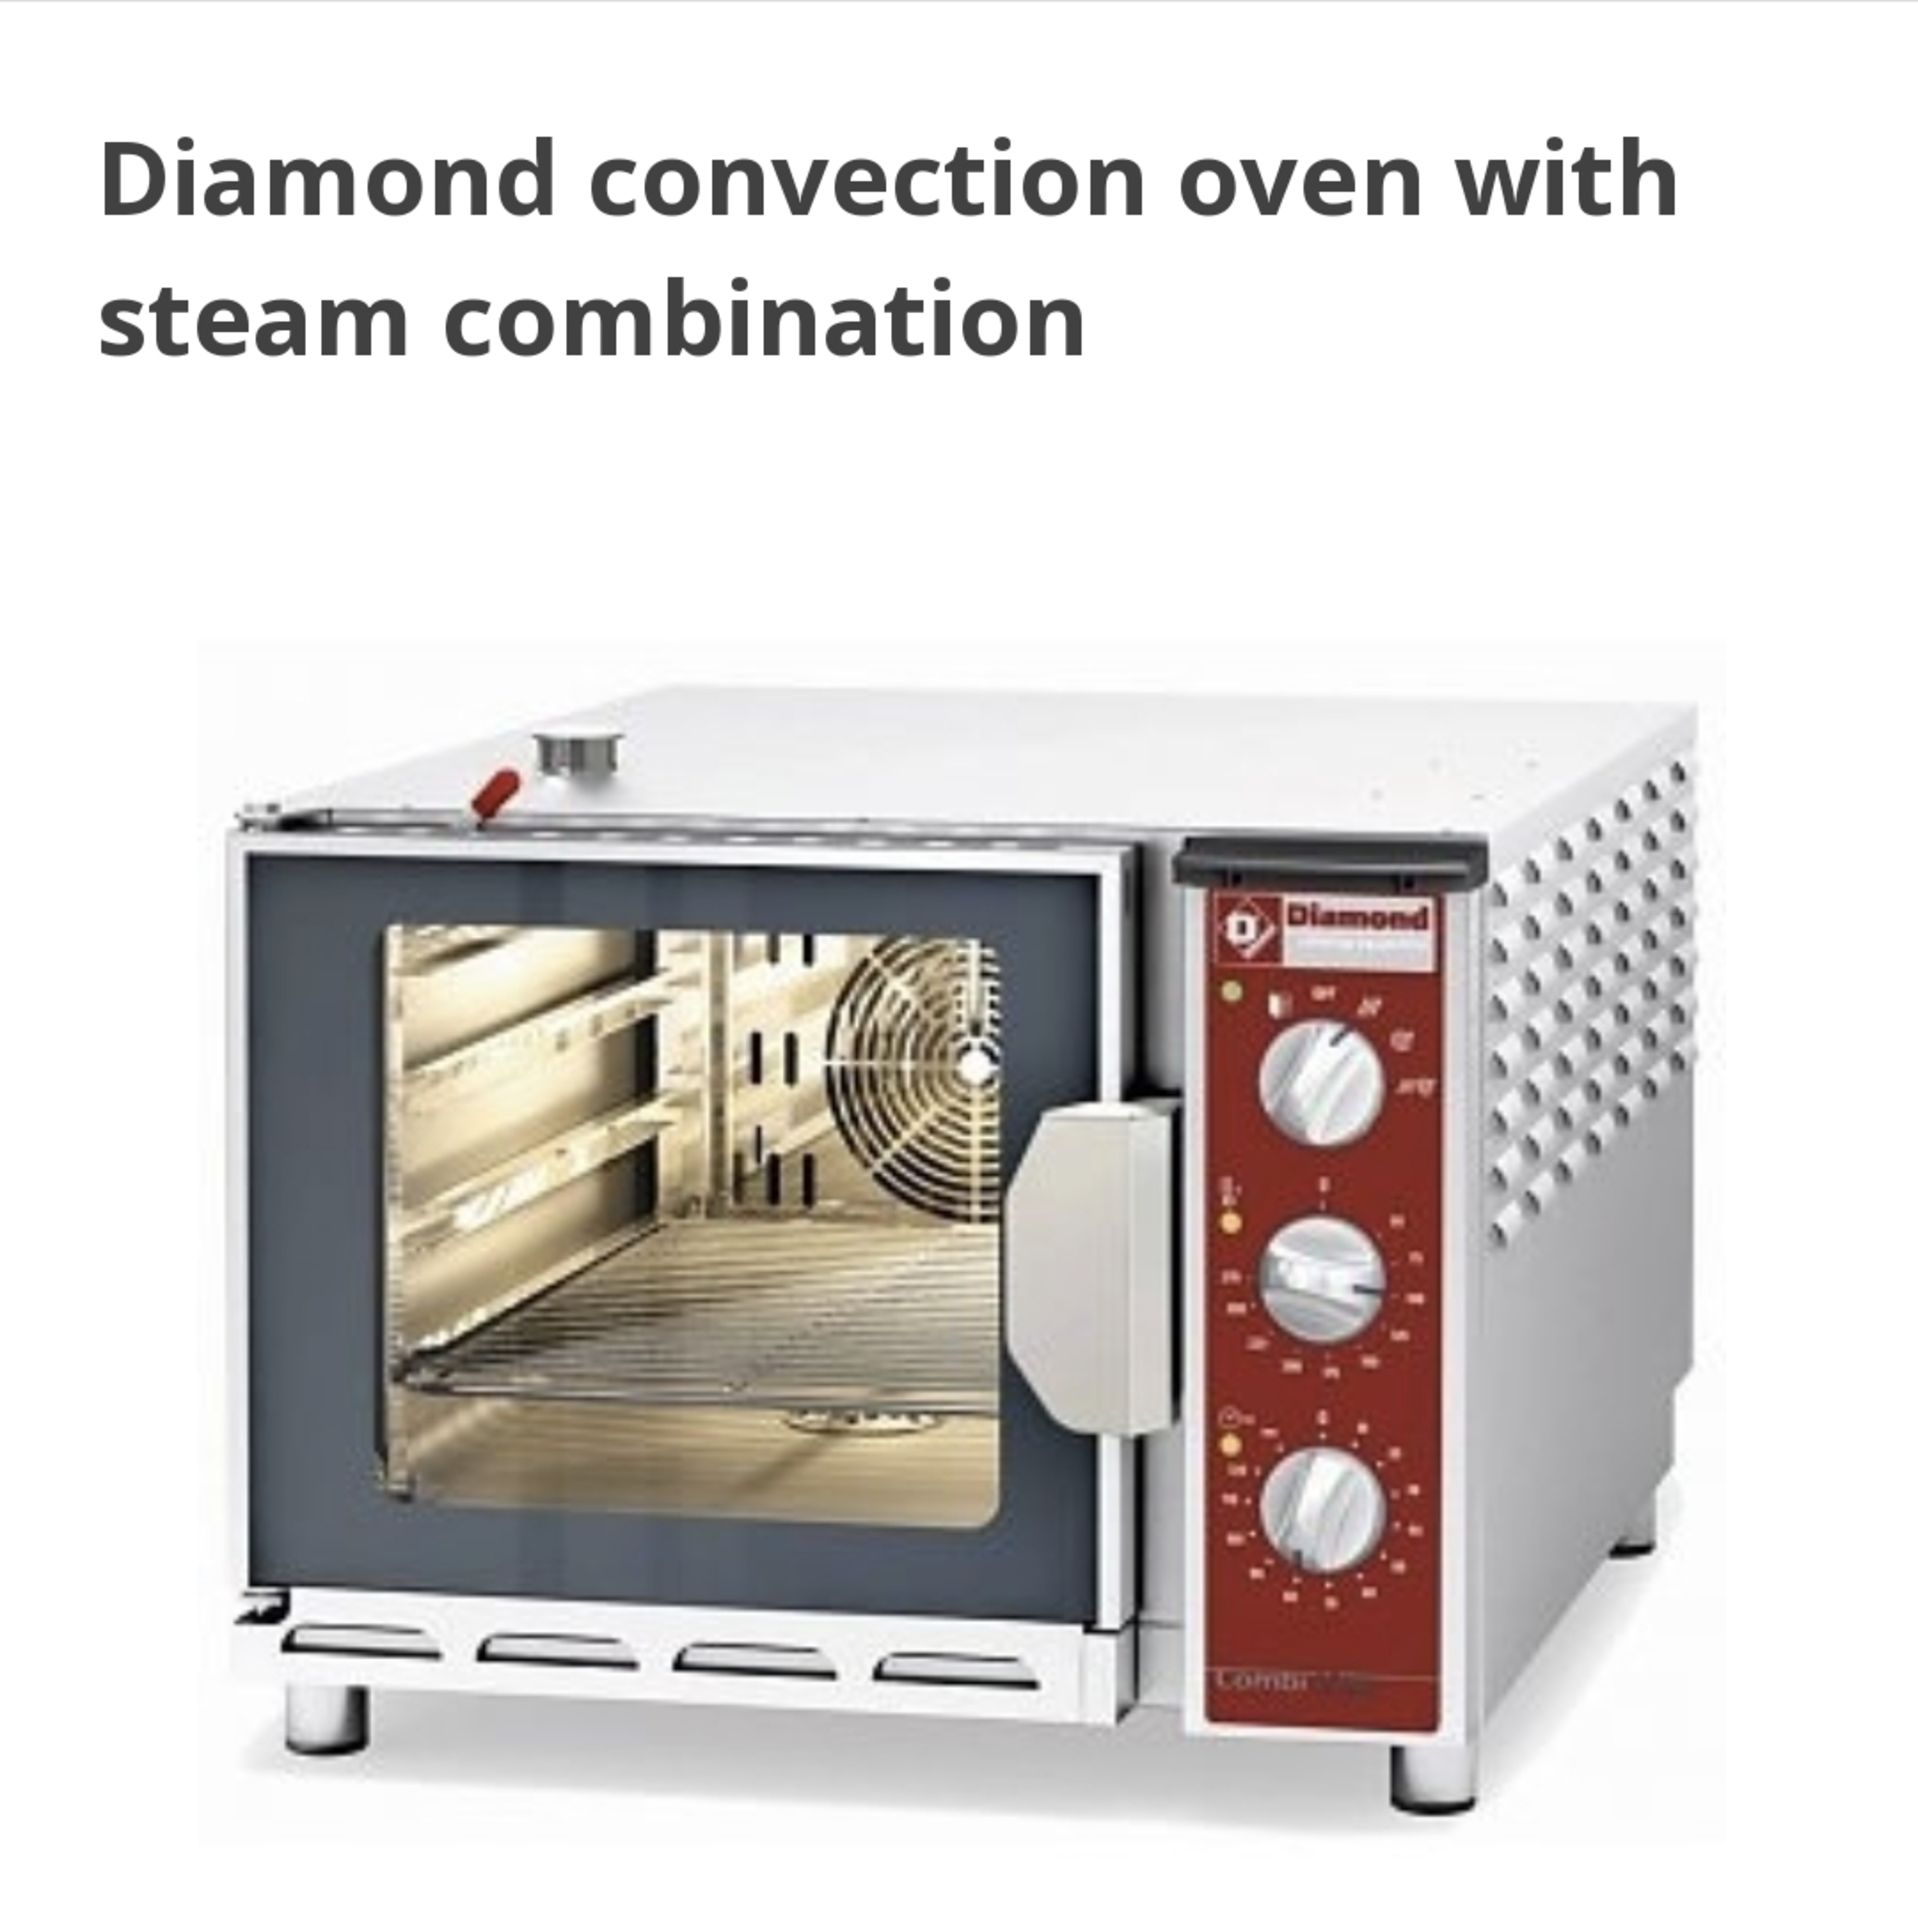 Diamond Convention Oven With Steam Combination - Image 2 of 4